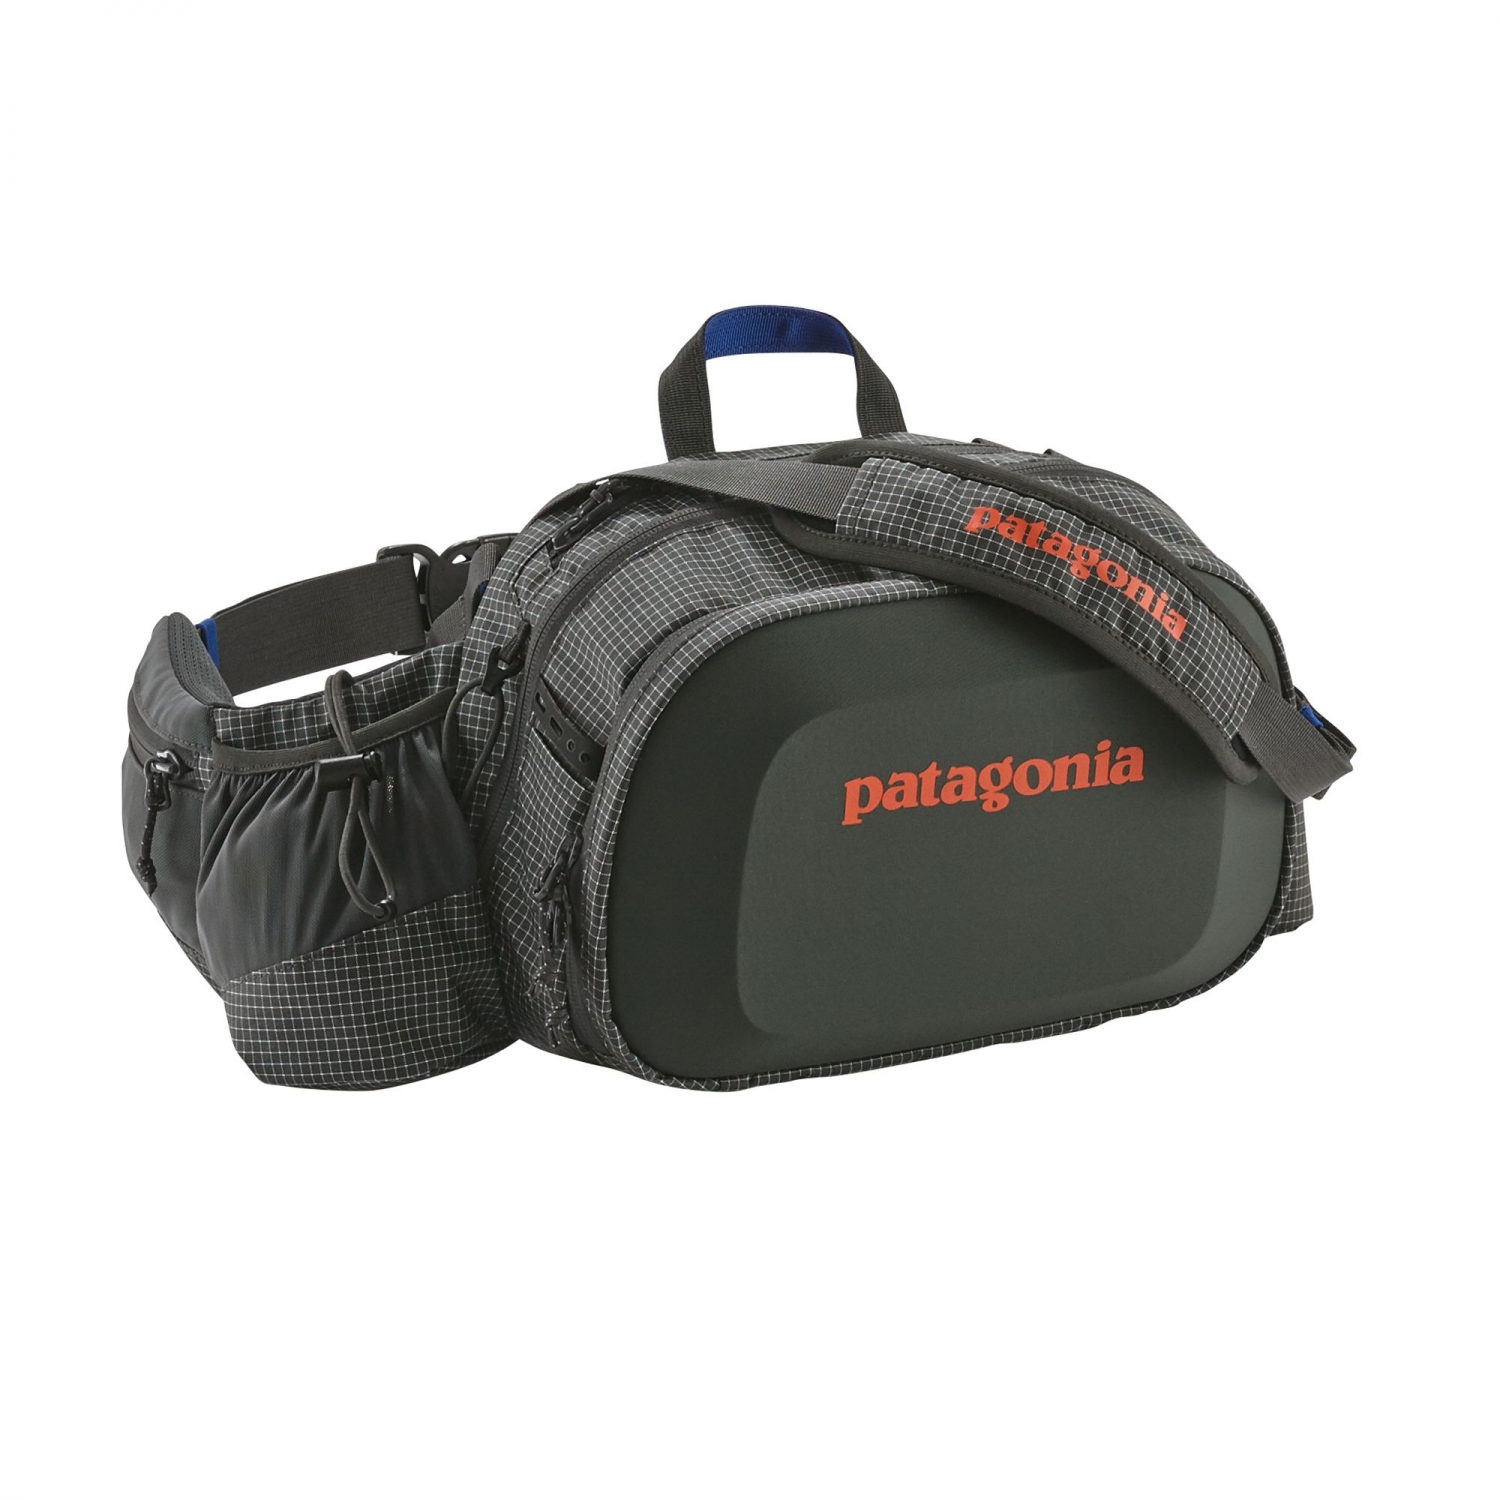 Patagonia Stealth Hip Pack 6L Forge Grey